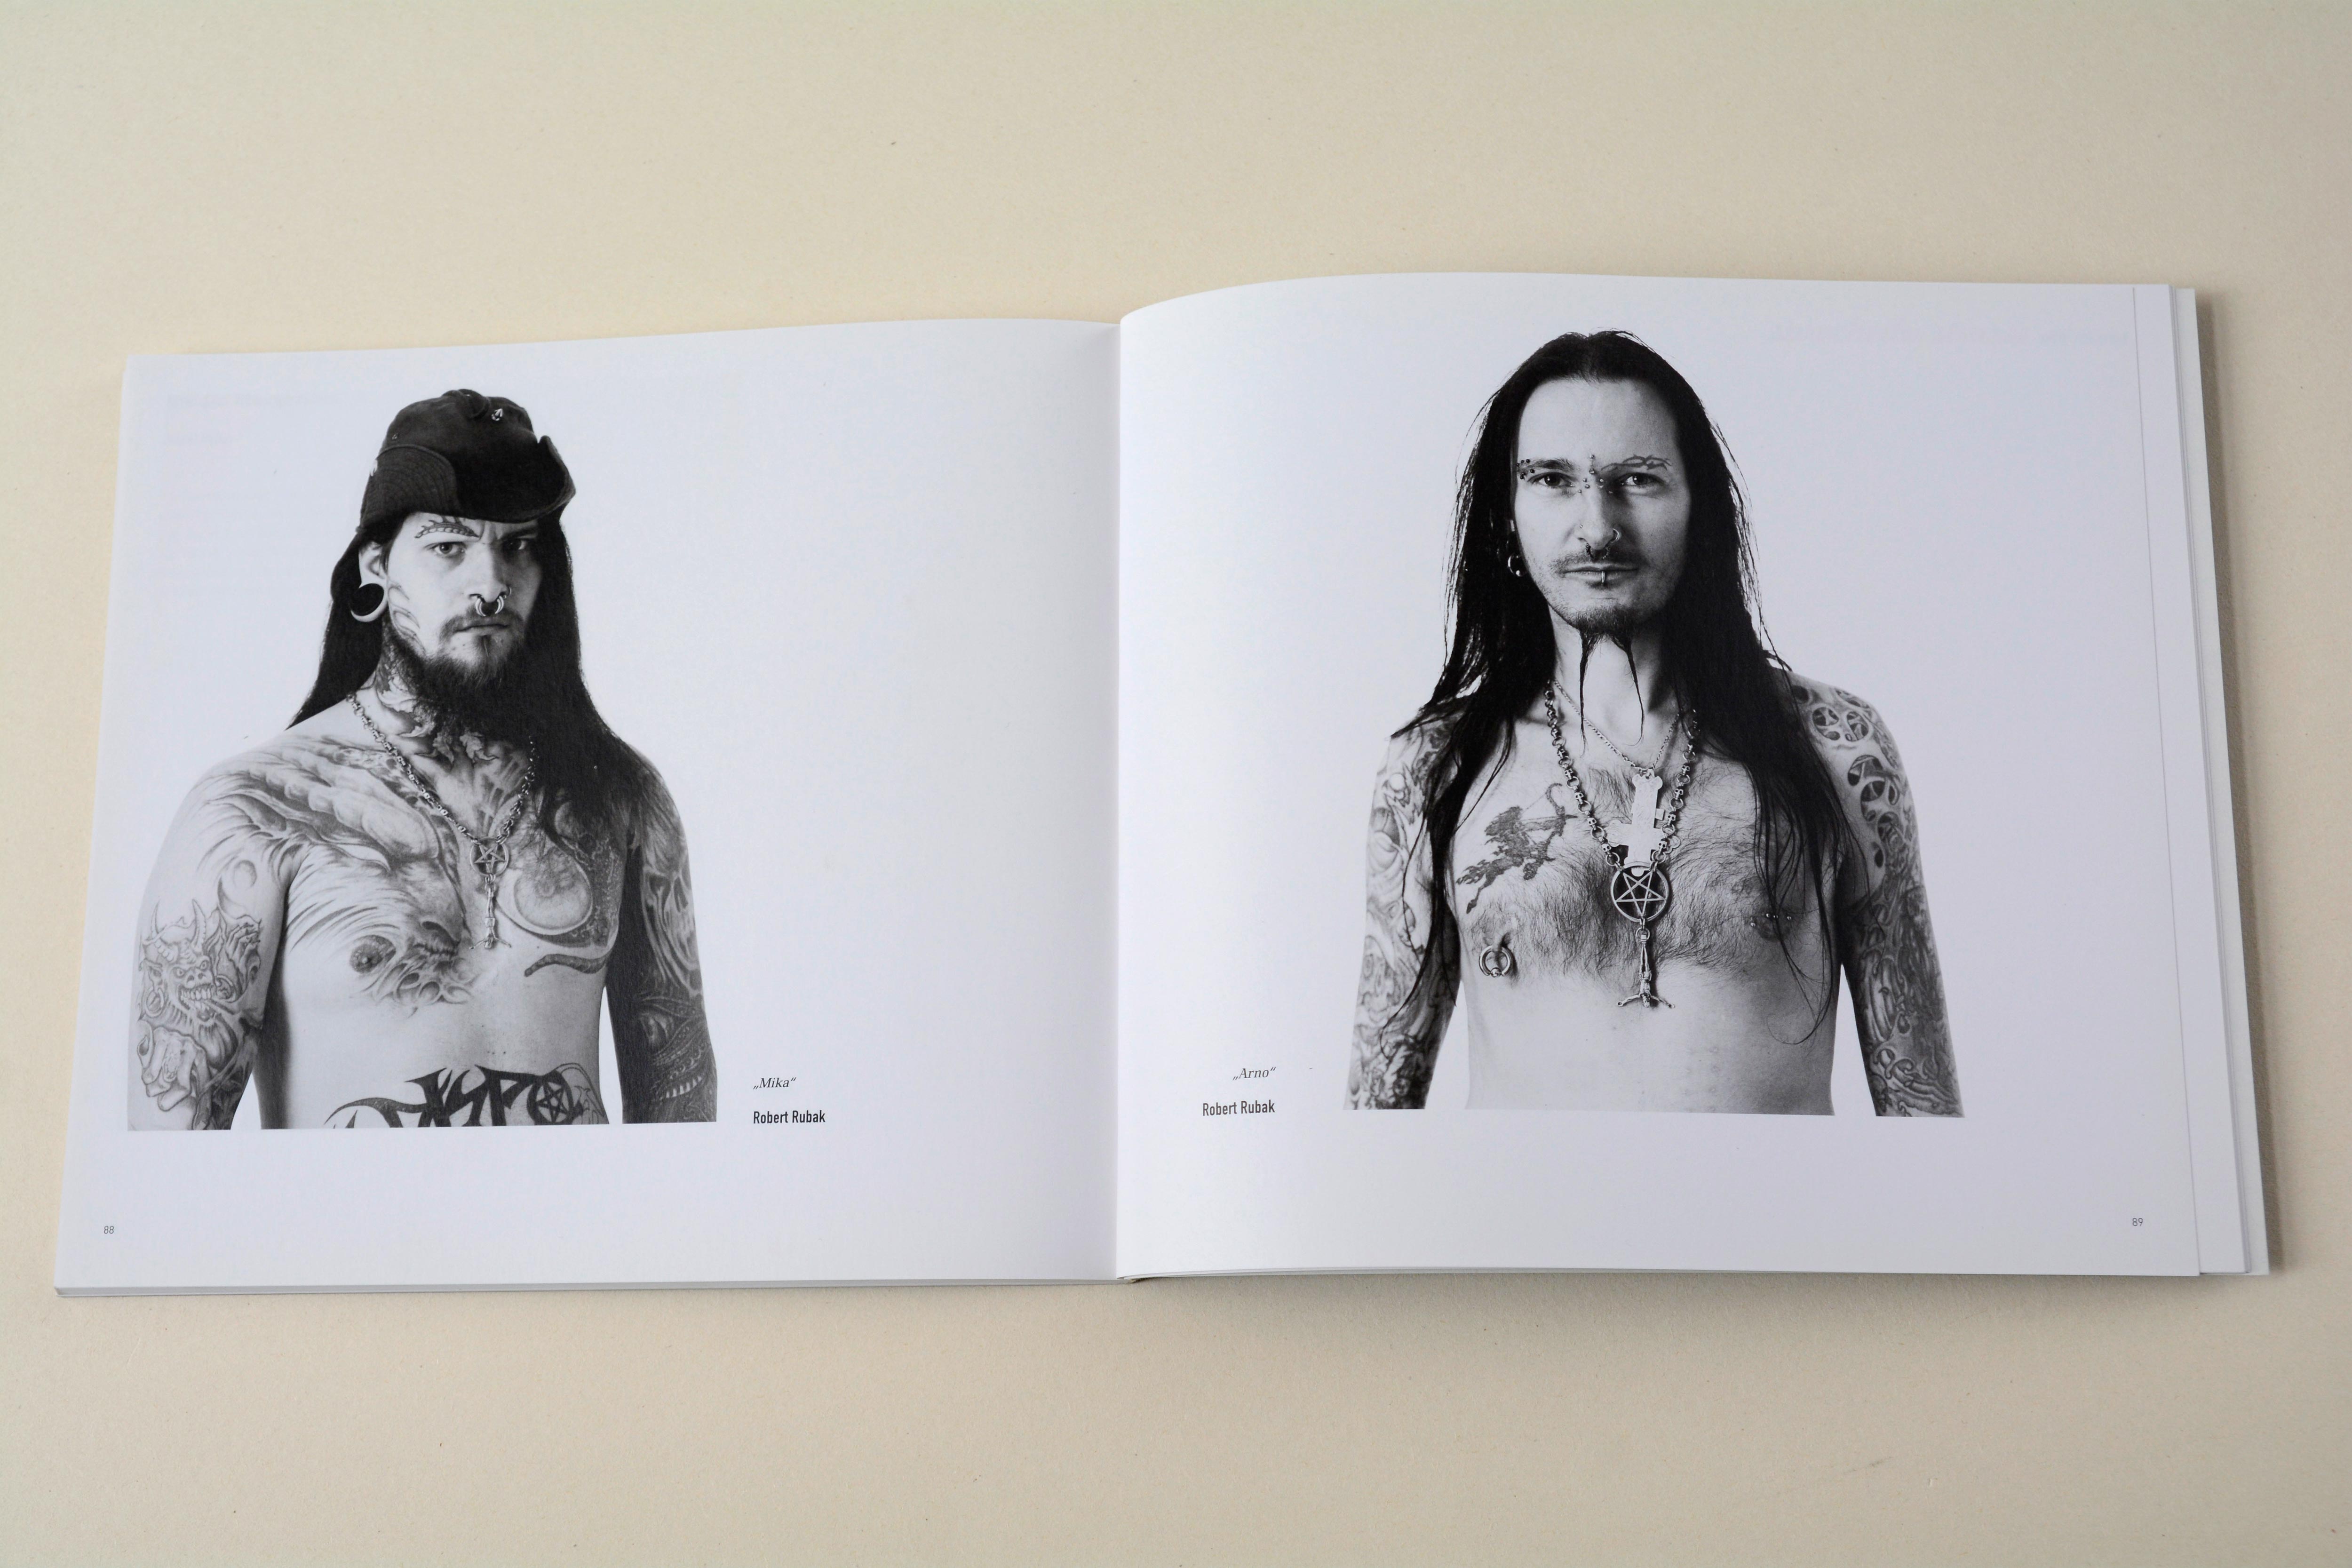 Double page. B/W photo of tattoed and pierced man on each page. Little text at bottom.